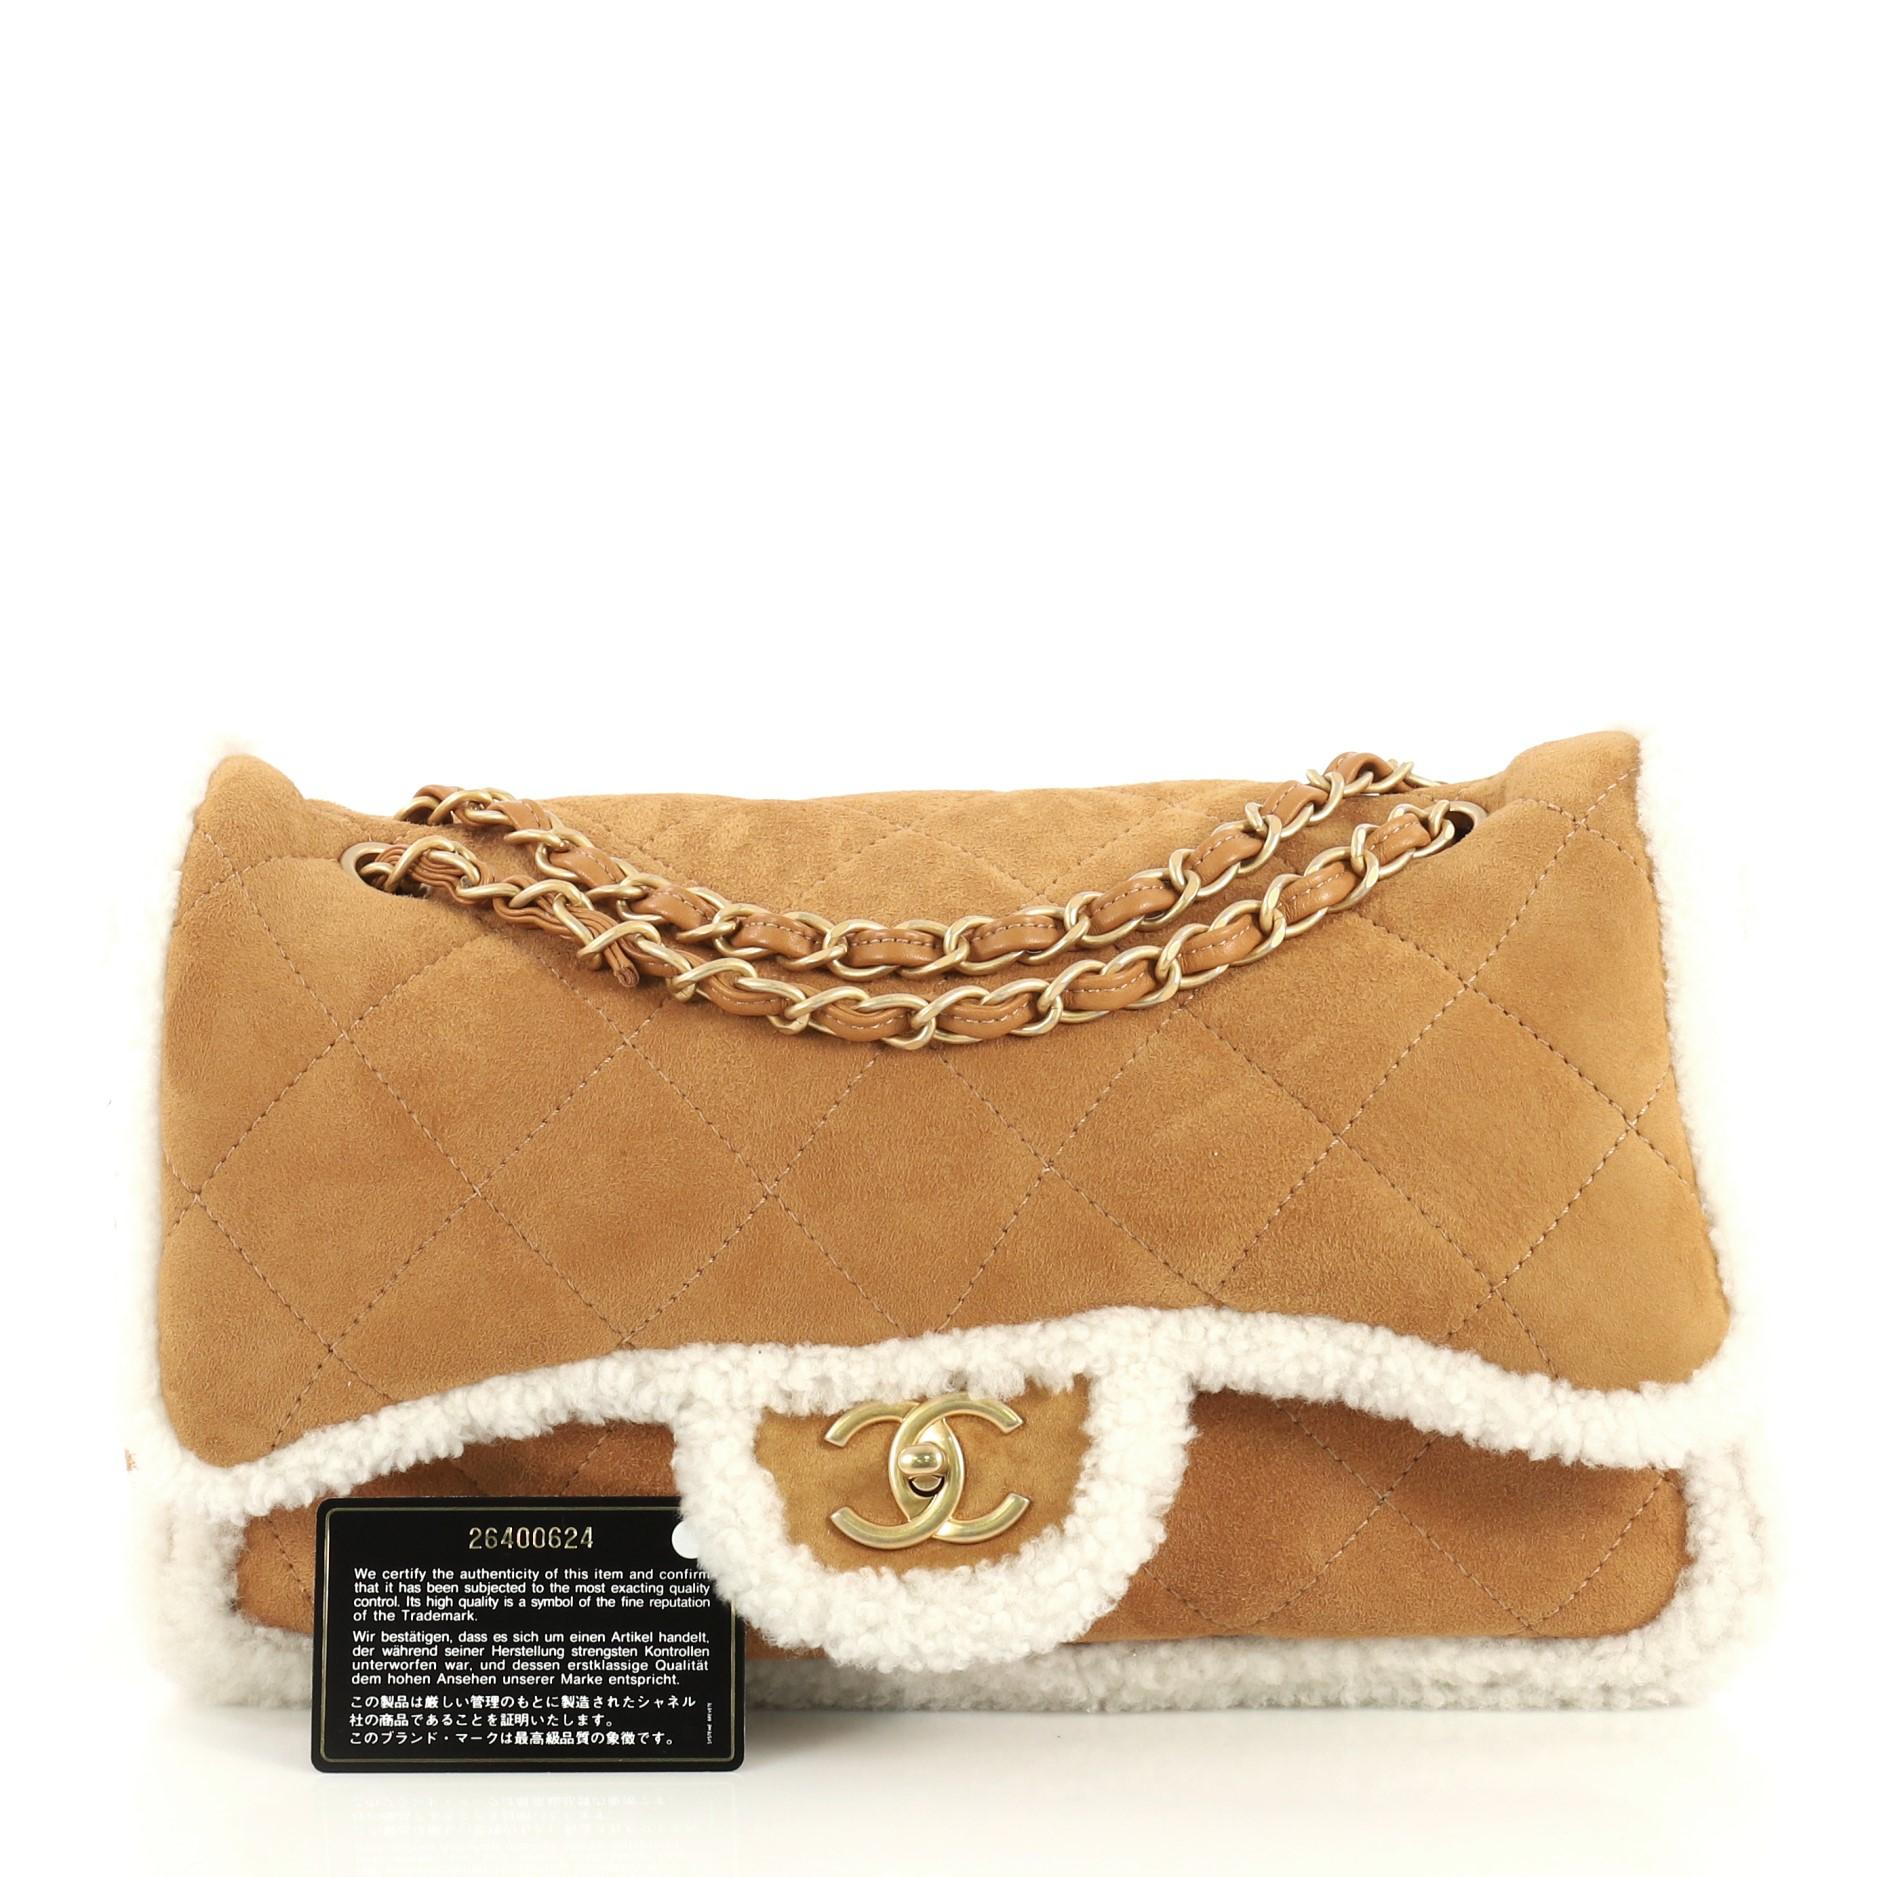 This Chanel Coco Neige Flap Bag Quilted Suede with Shearling Large, crafted in brown and white shearling, features woven-in leather chain link strap and aged gold-tone hardware. Its CC turn-lock closure opens to a brown leather and white shearling